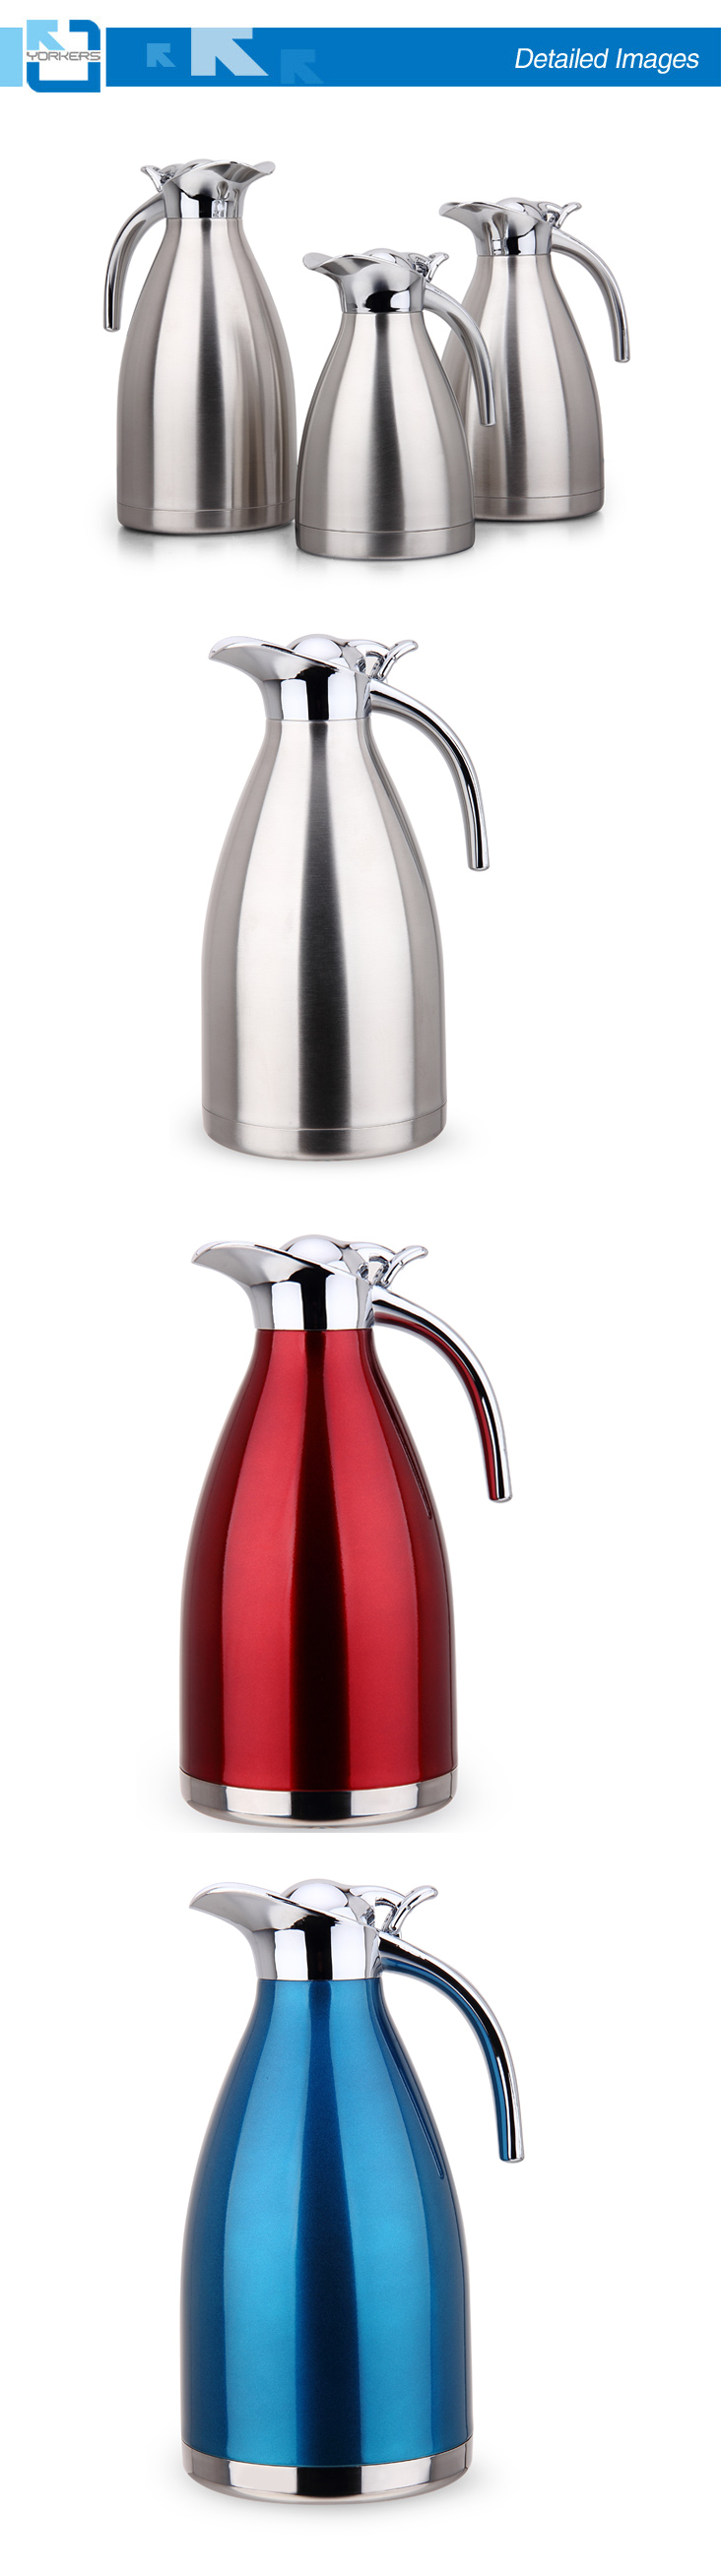 201 Double Wall Stainless Steel Coffee Carafe/Vacuum Kettle